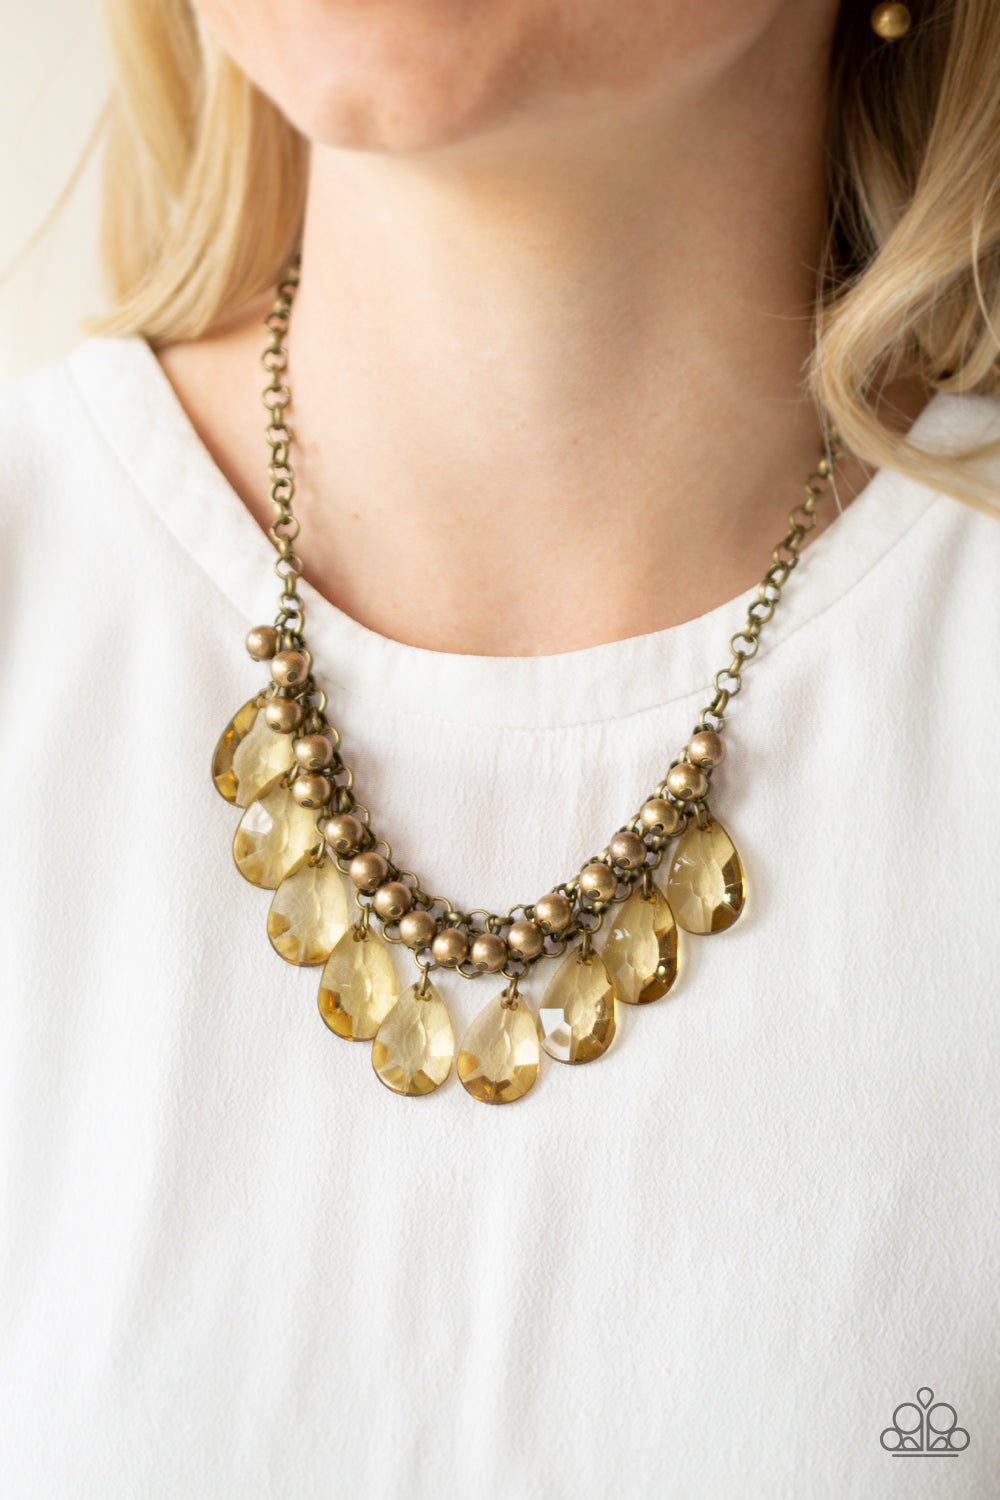 Fashionista Flair - Necklace